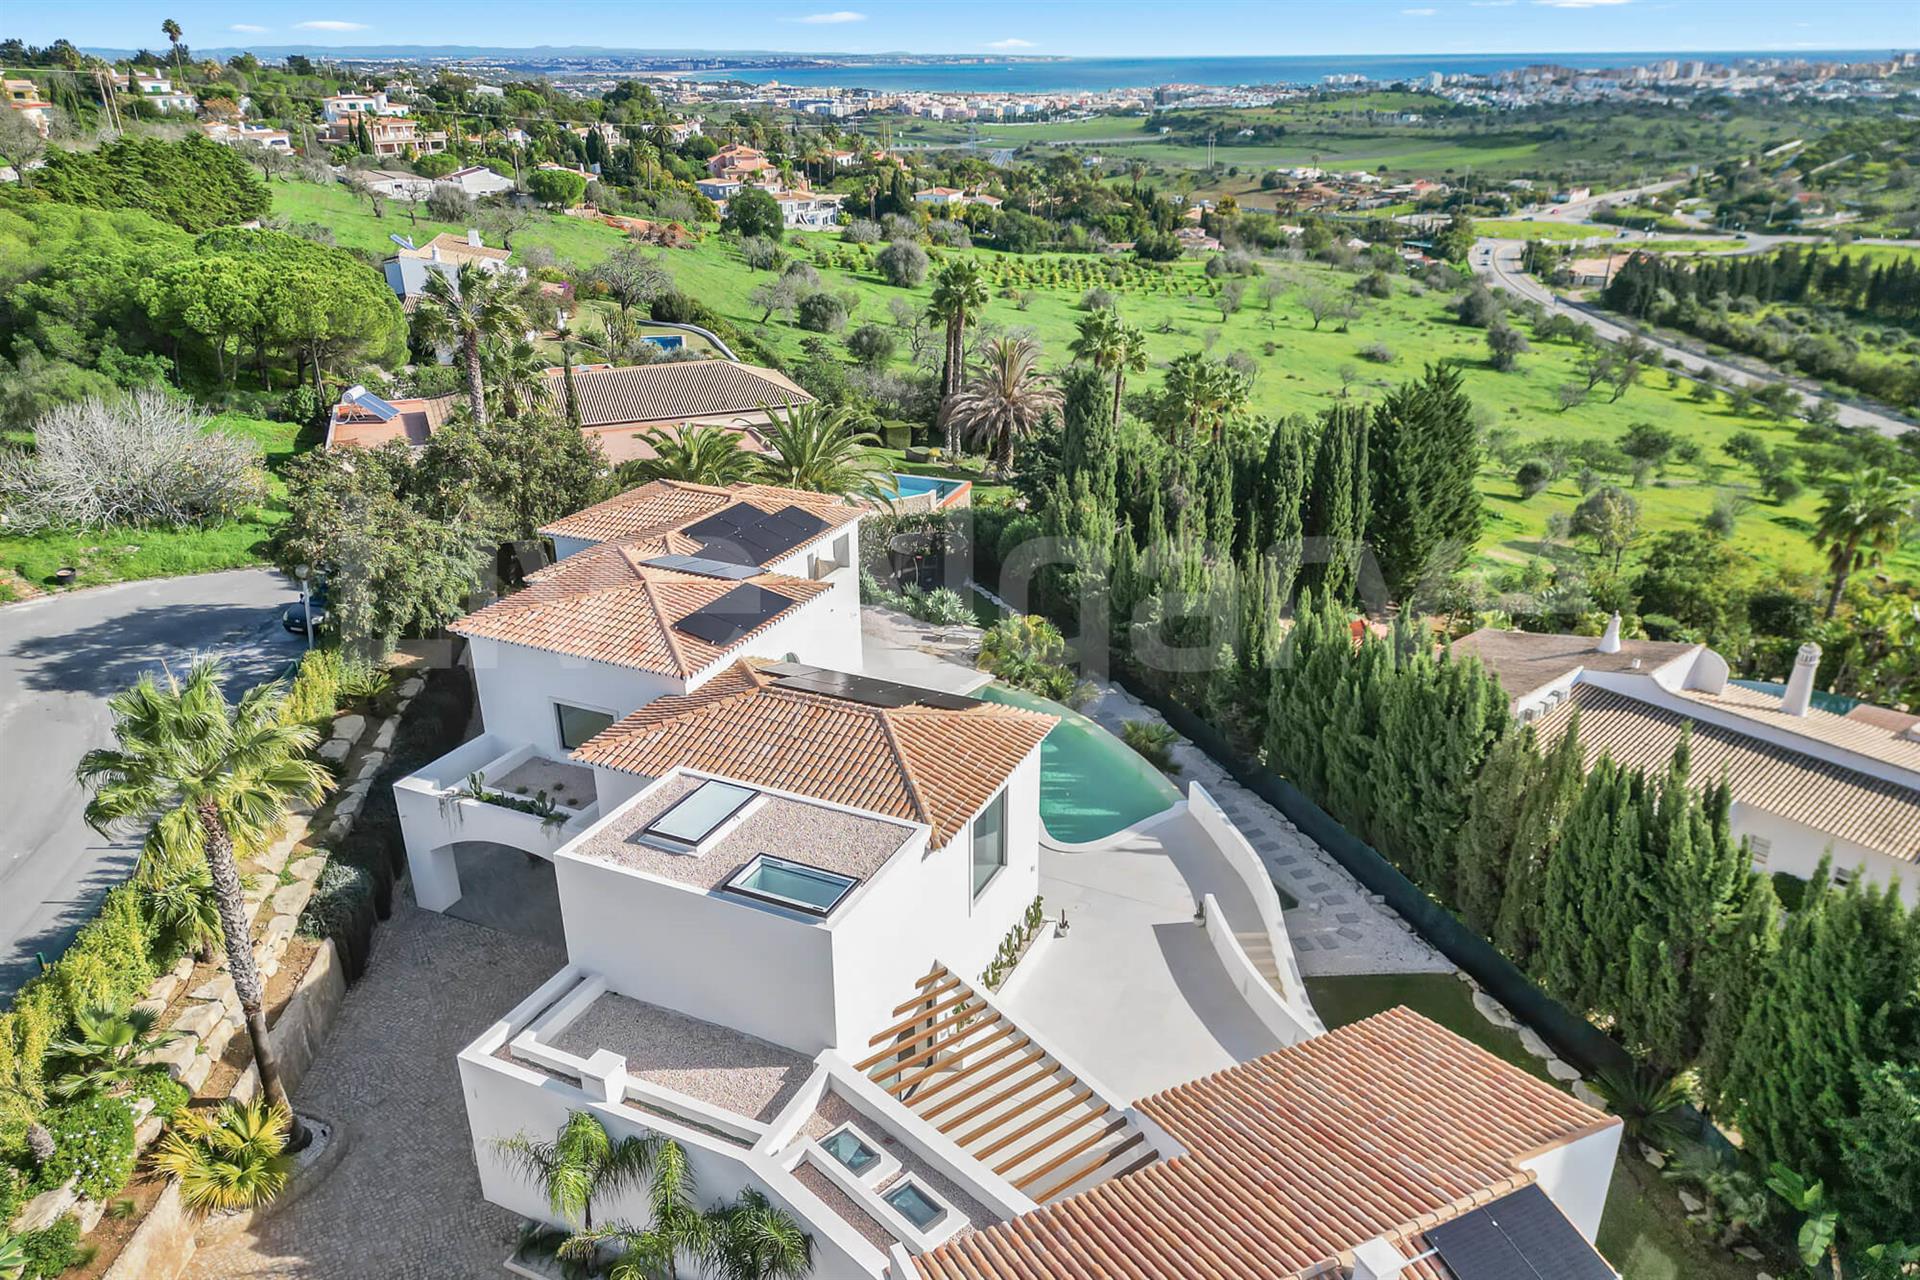 Sea View | Unique Featured T4 Grand Villa At Funchal For Sale - Lagos